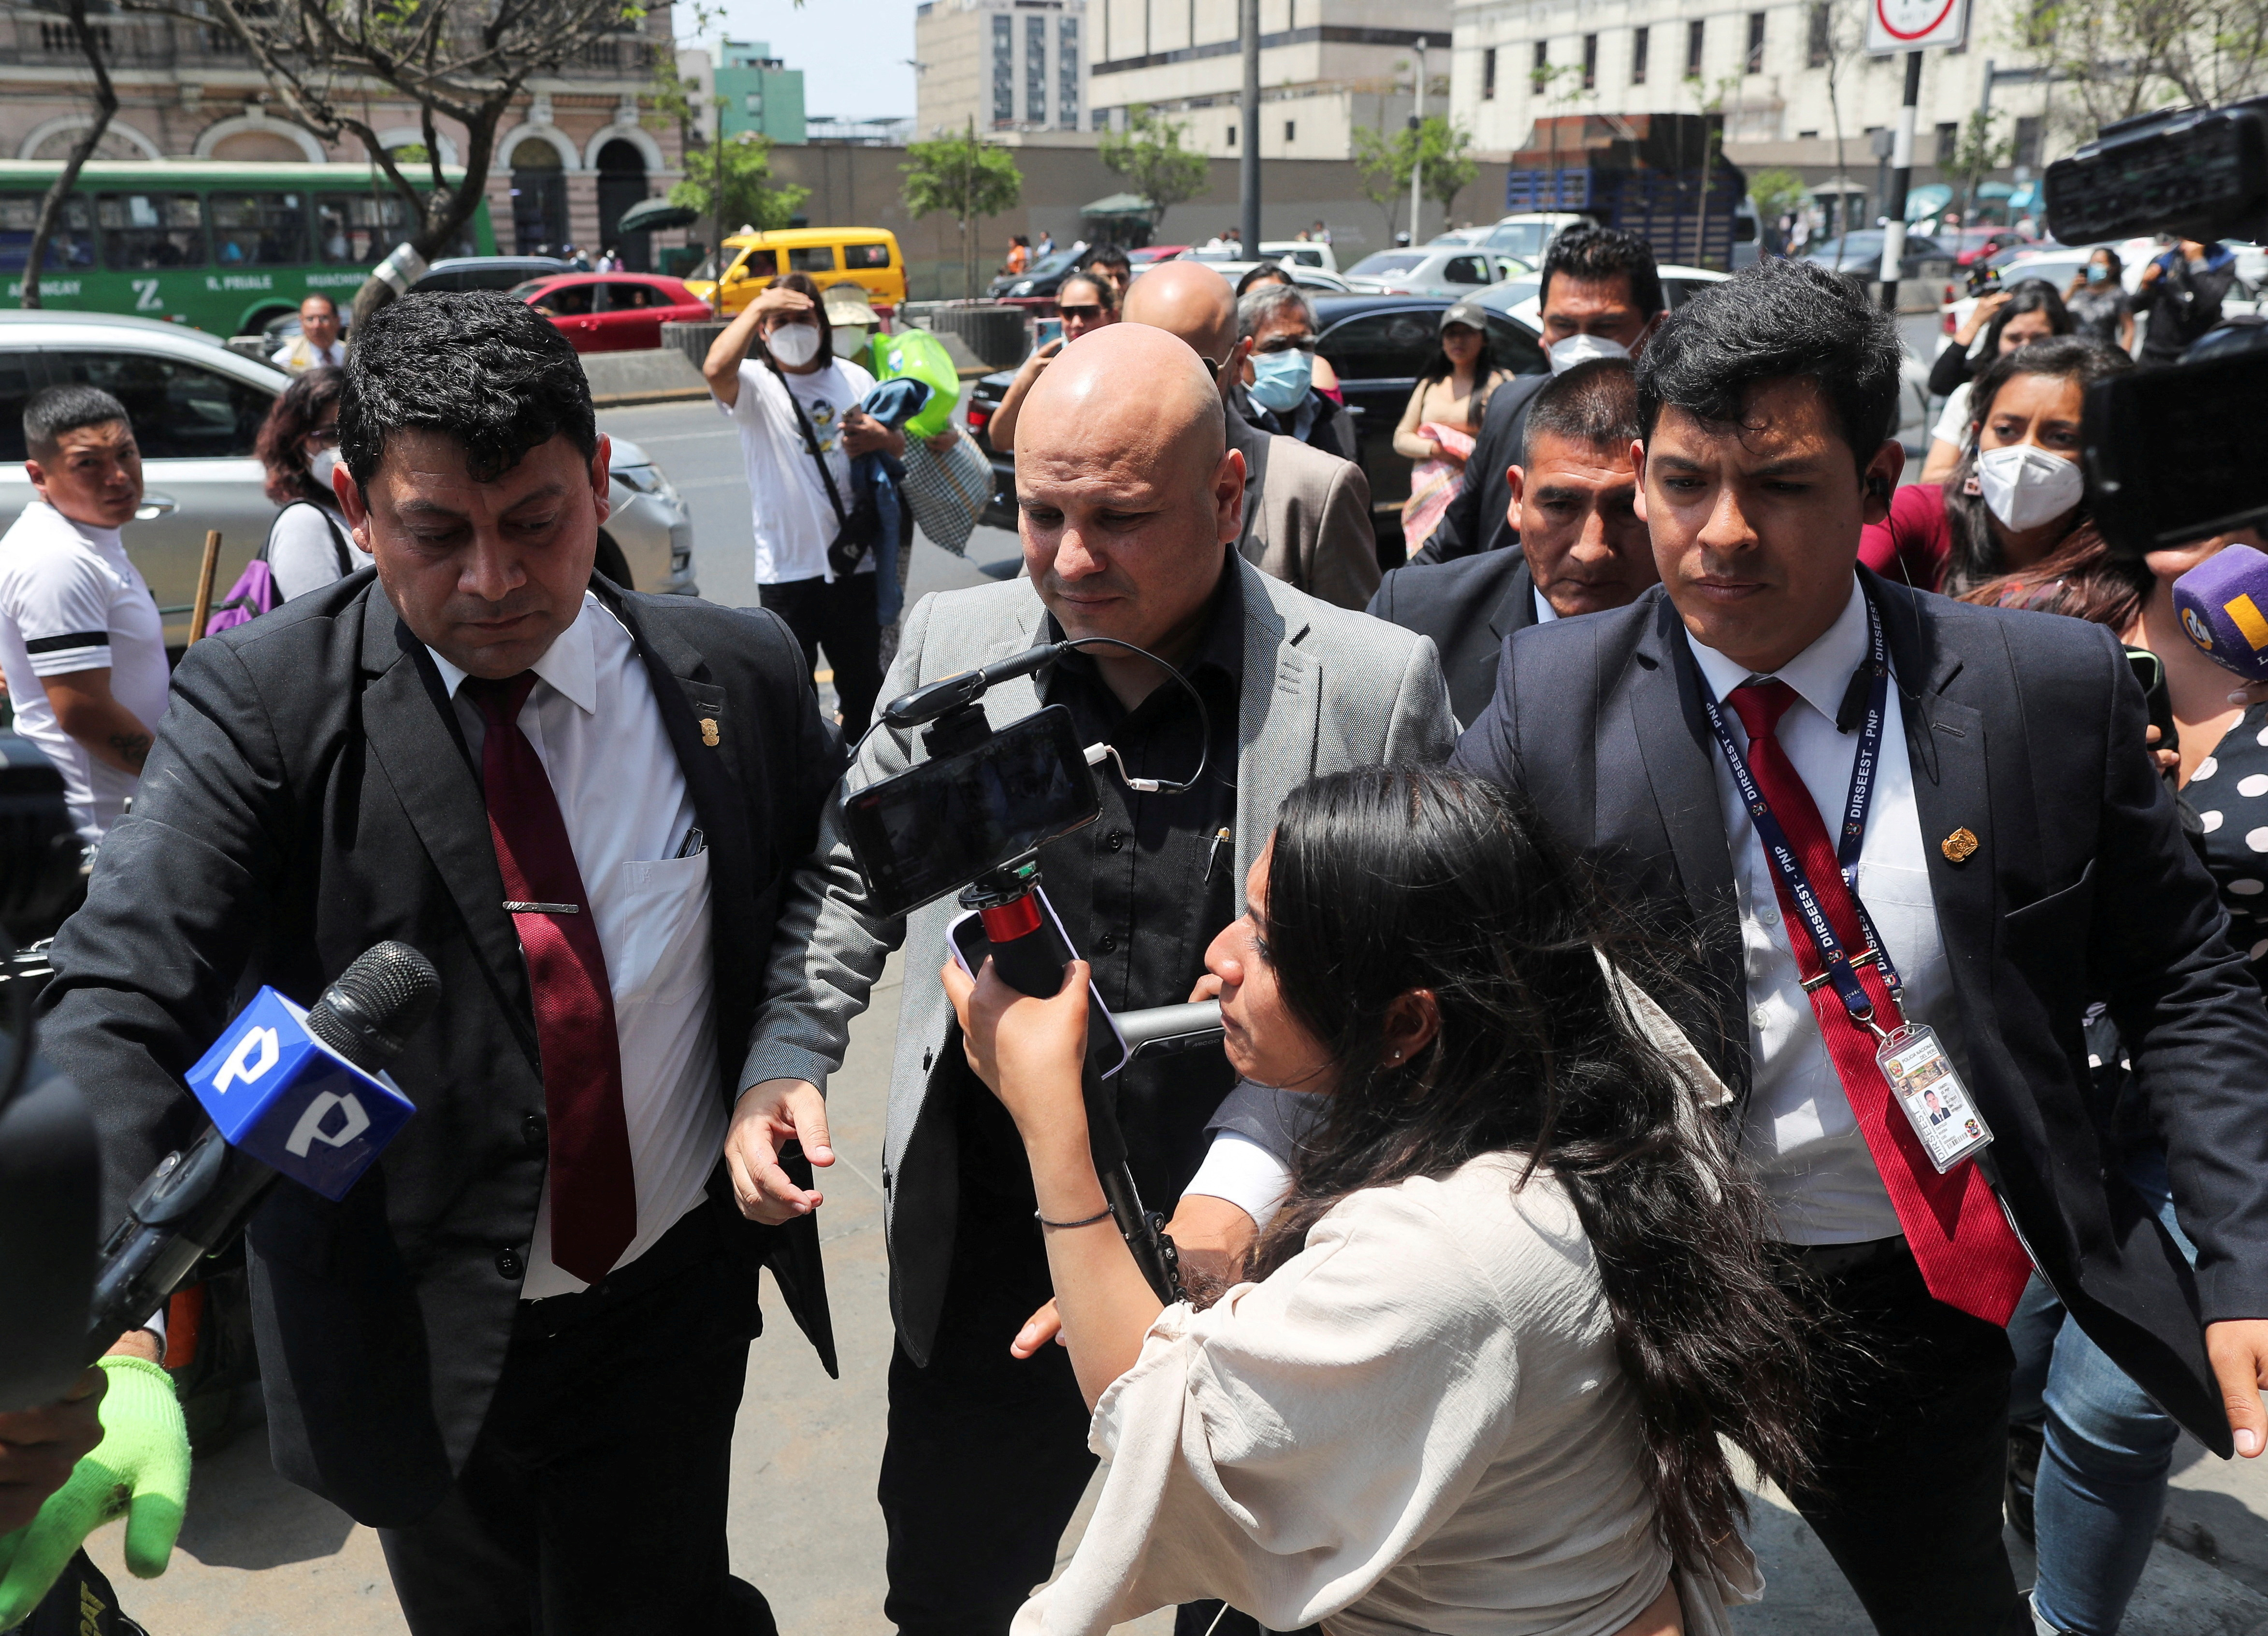 Alejandro Salas, Labour Minister during Castillo's government, arrives at the prosecutor's office, in Lima